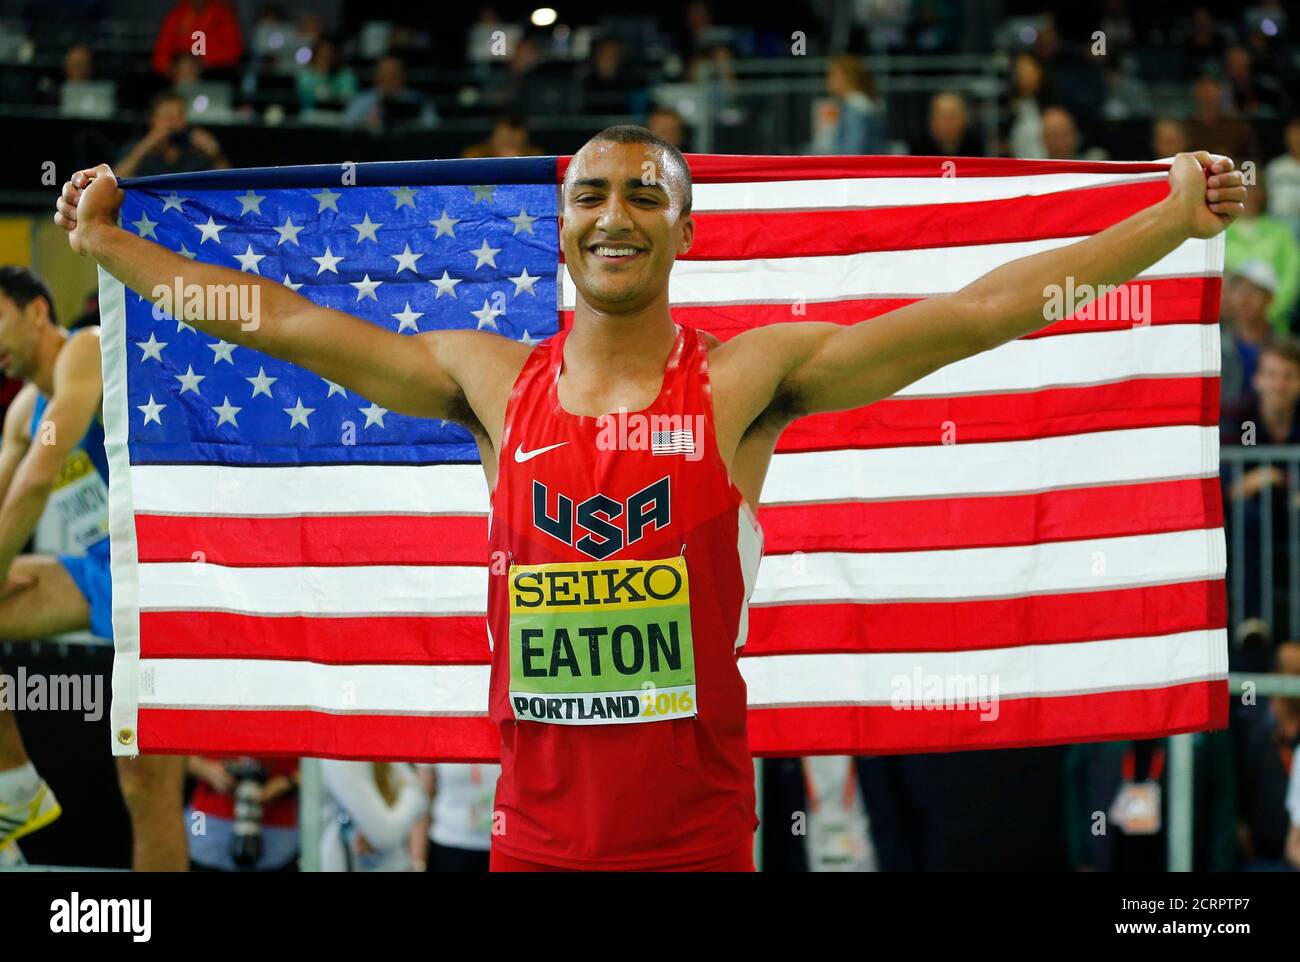 Ahton Eaton of the U.S. celebrates after winning the gold medal in the men's heptathlon during the IAAF World Indoor Athletics Championships in Portland, Oregon March 19, 2016. REUTERS/Mike Blake Stock Photo